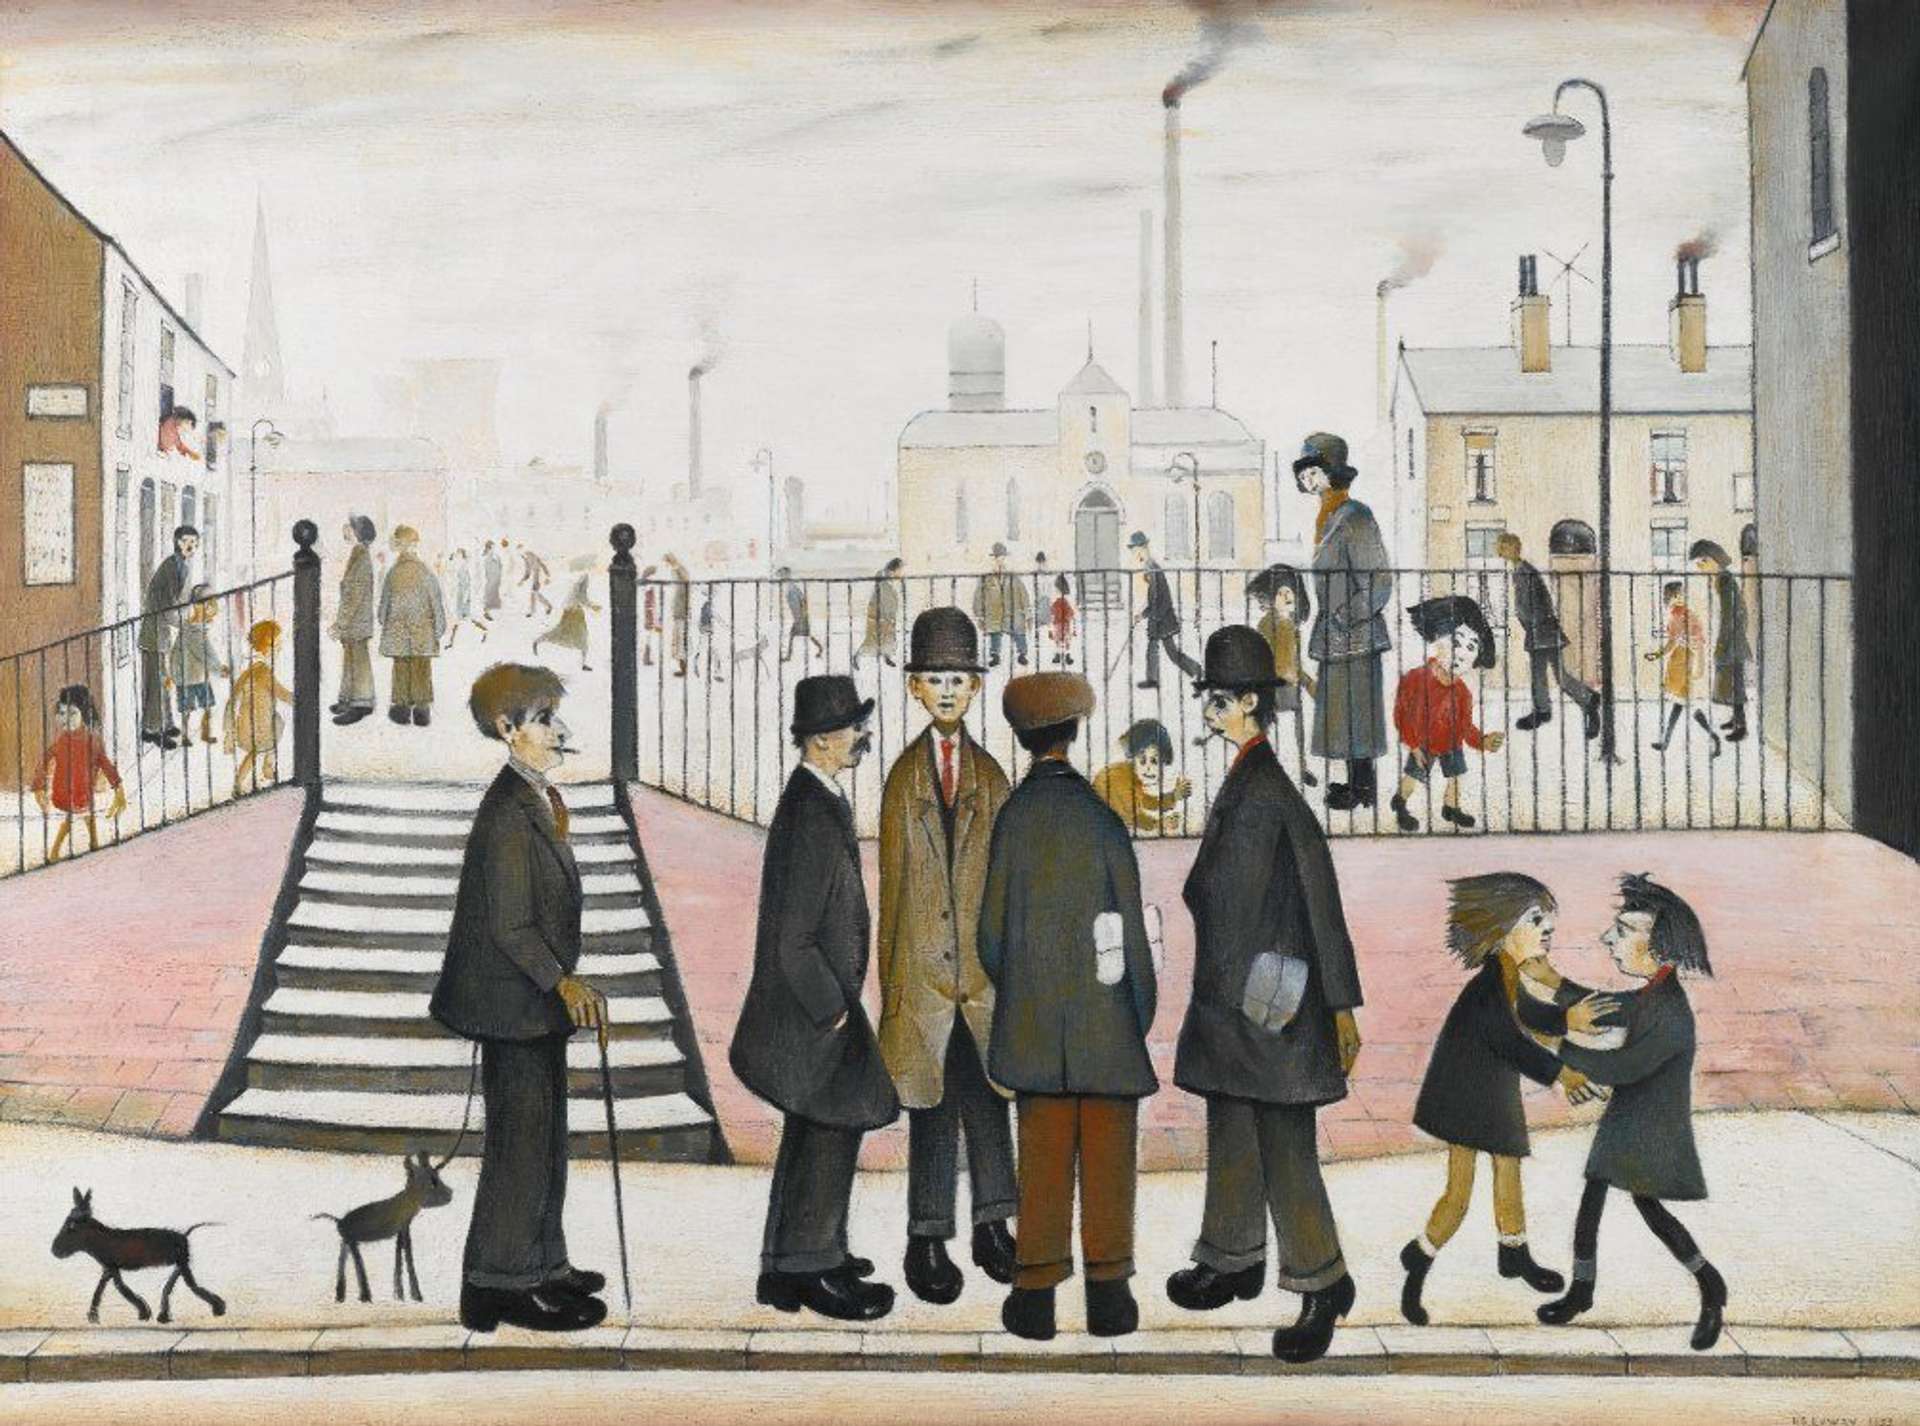 A Town's Square by L S Lowry